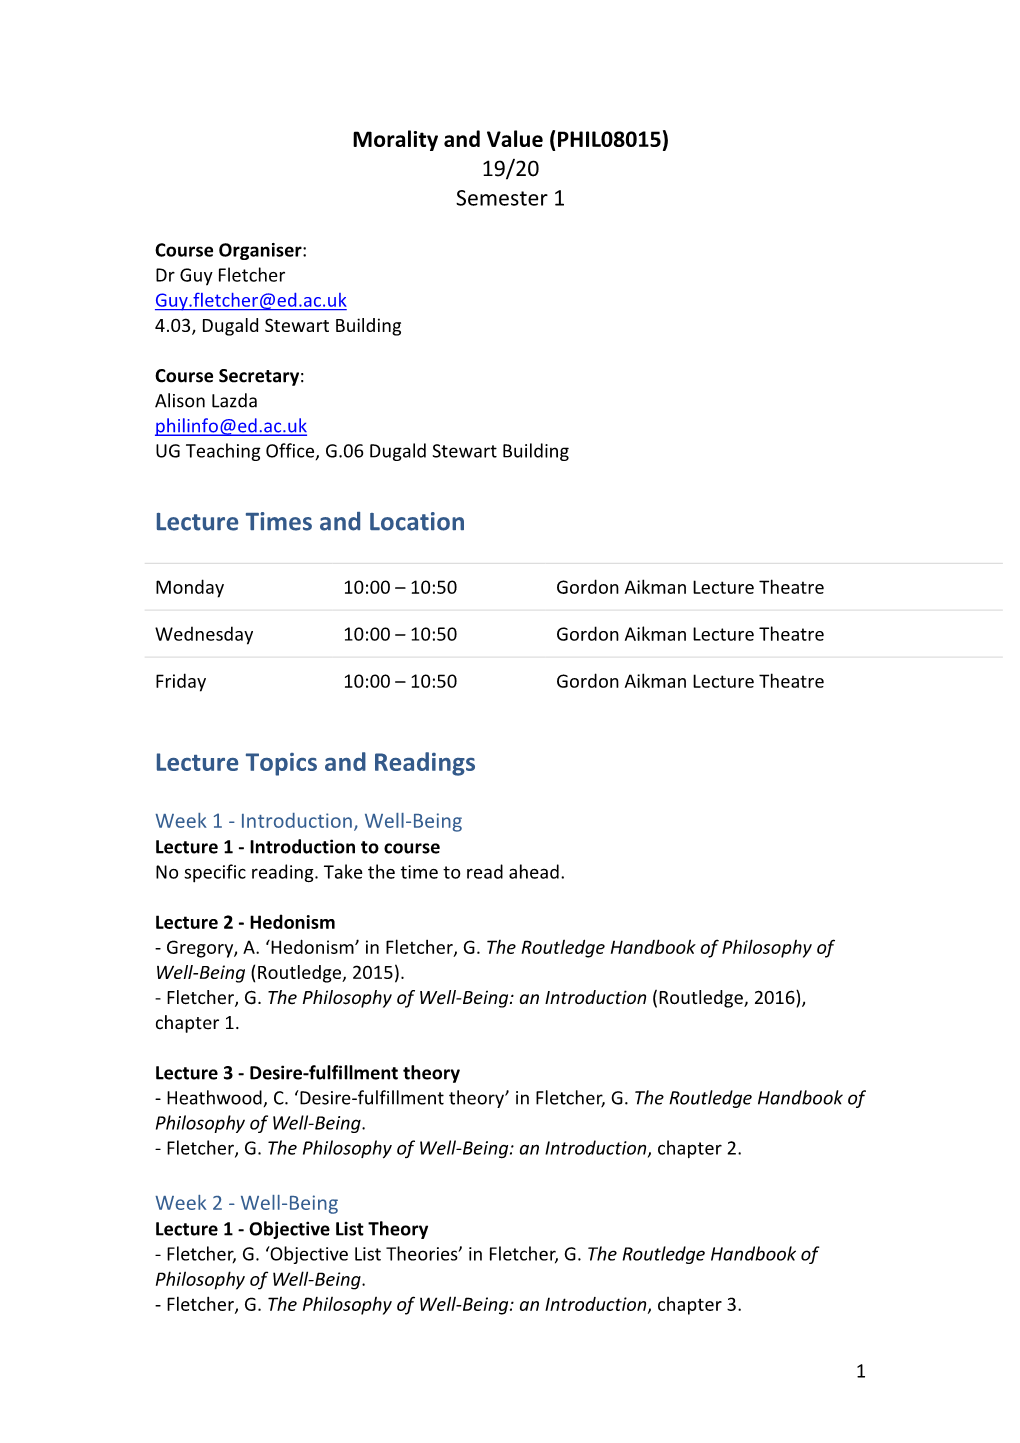 Lecture Times and Location Lecture Topics and Readings